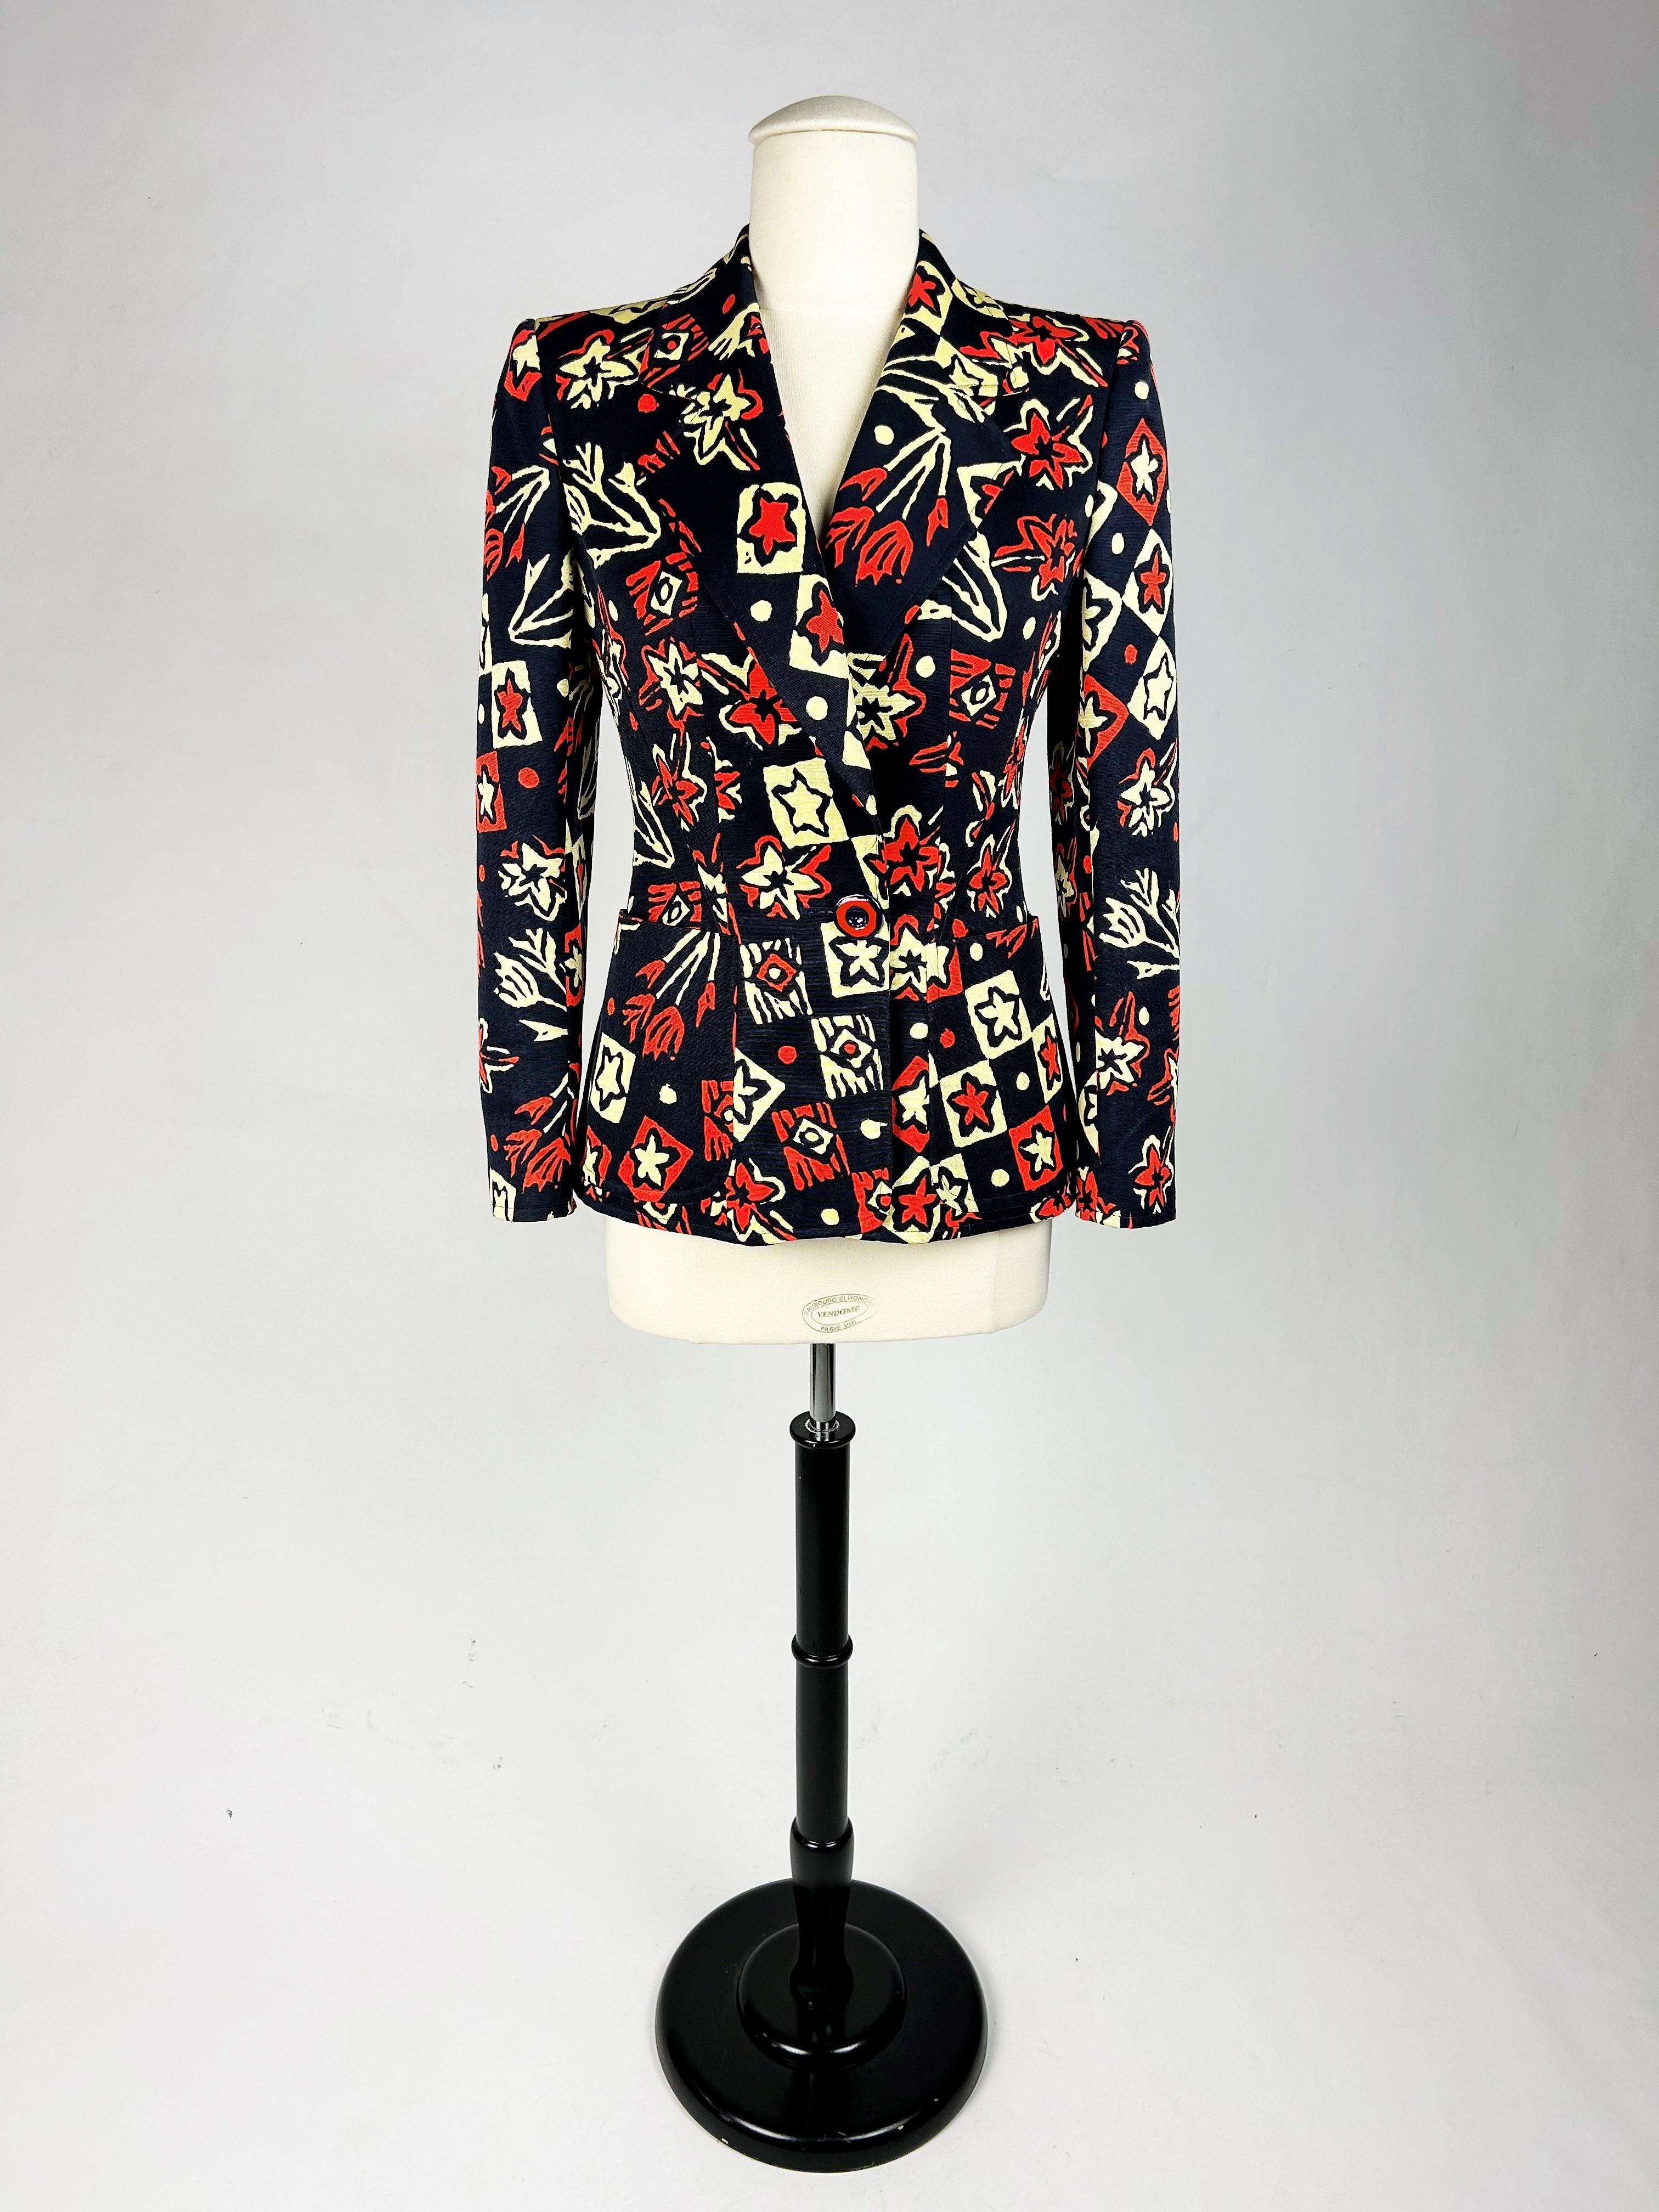 Black Jacket by Christian Lacroix in printed silk Faille Circa 2000 For Sale